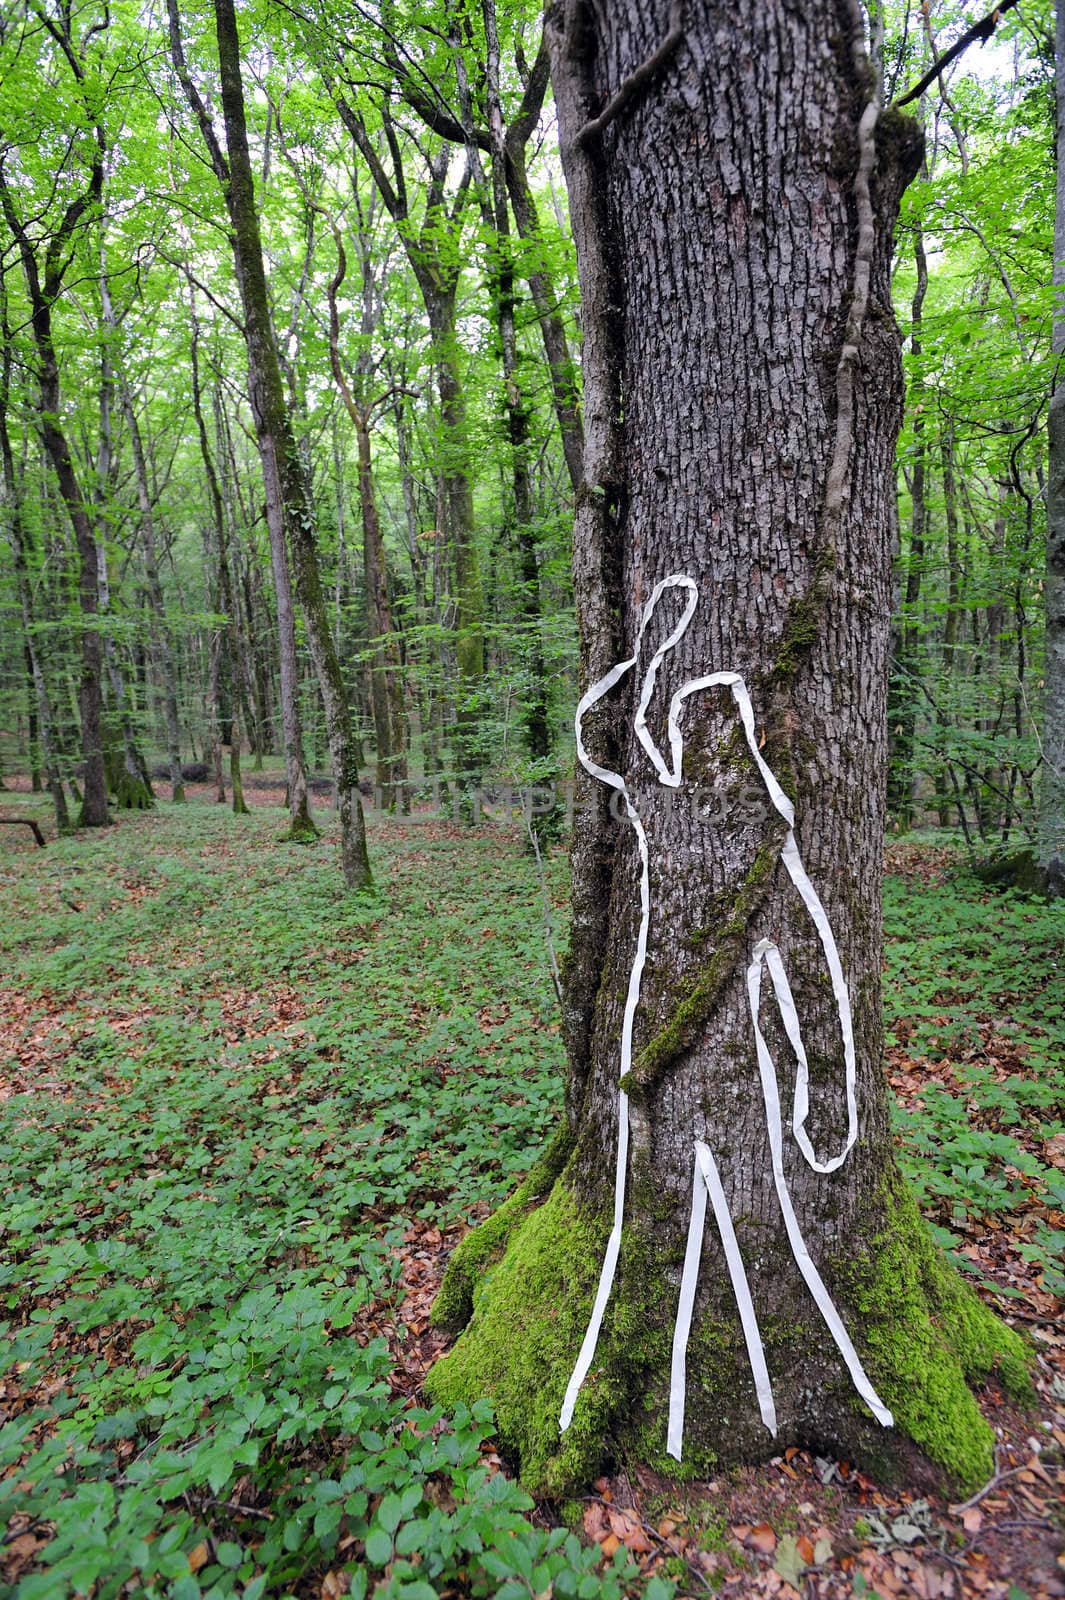 A scene of crime figure on a tree trunk in woodland. Space for text to left of image, against the undergrowth.